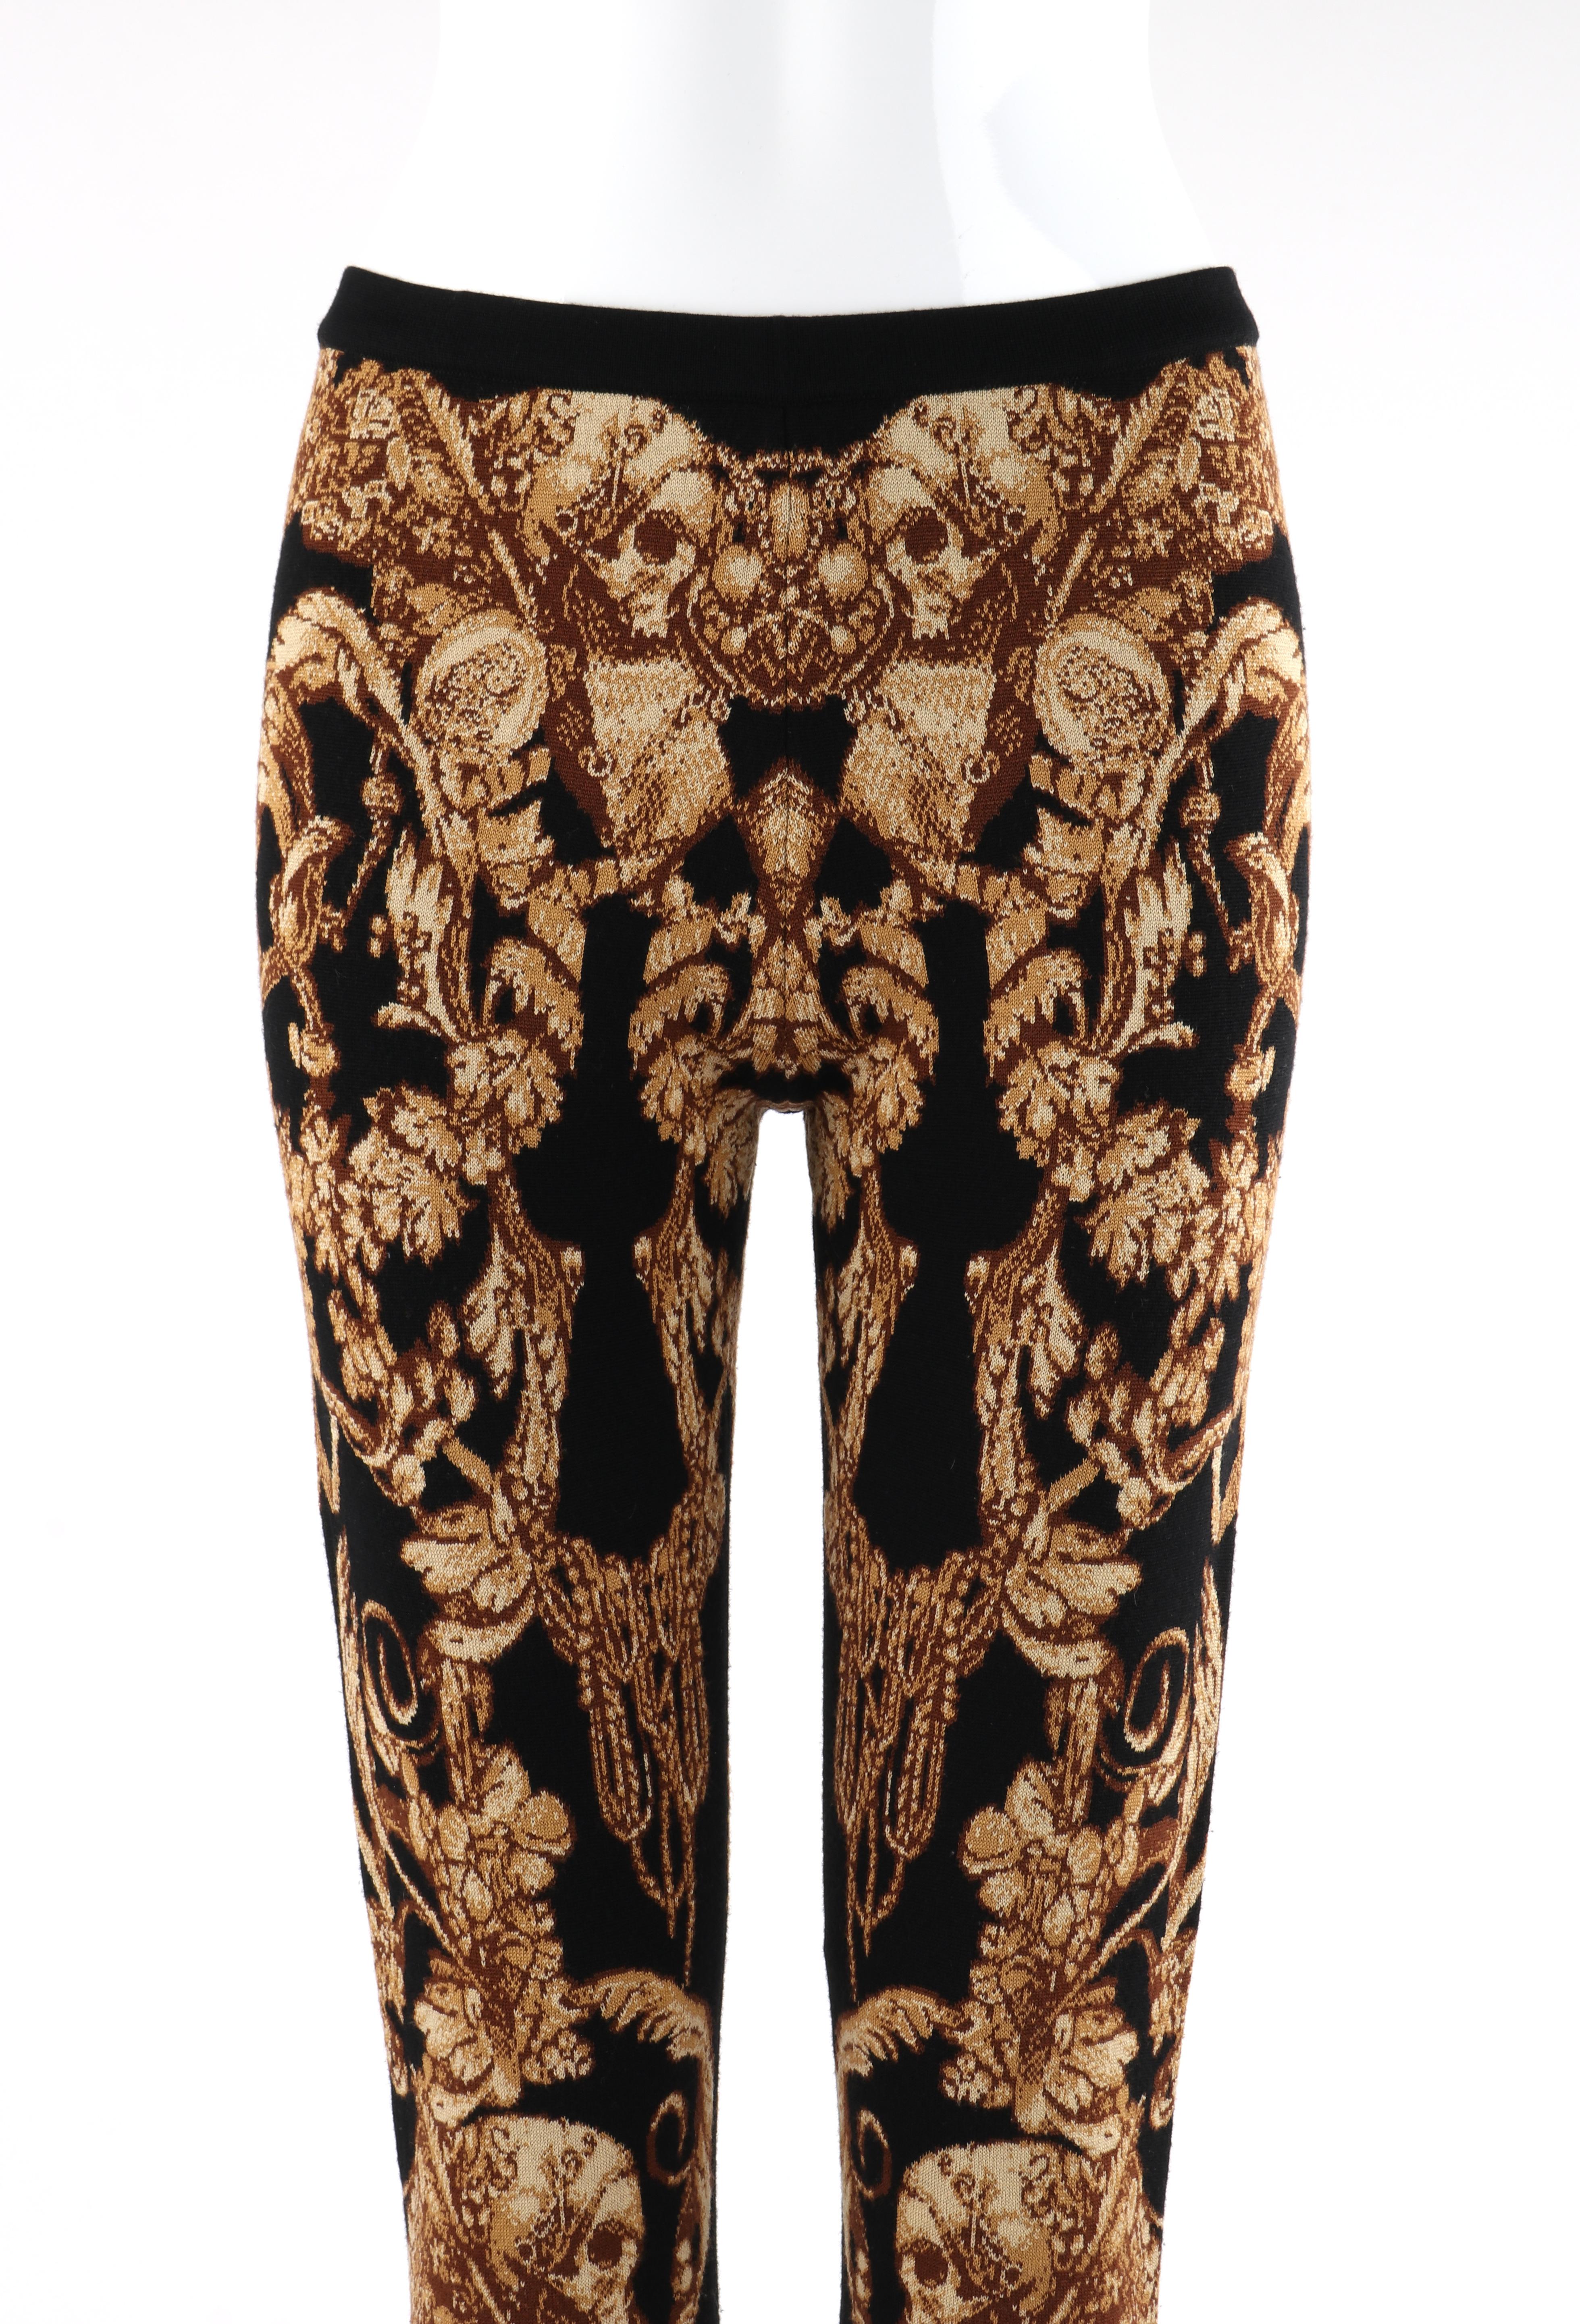 Brown ALEXANDER McQUEEN A/W 2010 “Angels & Demons” Grinling Gibbons Knit Leggings For Sale